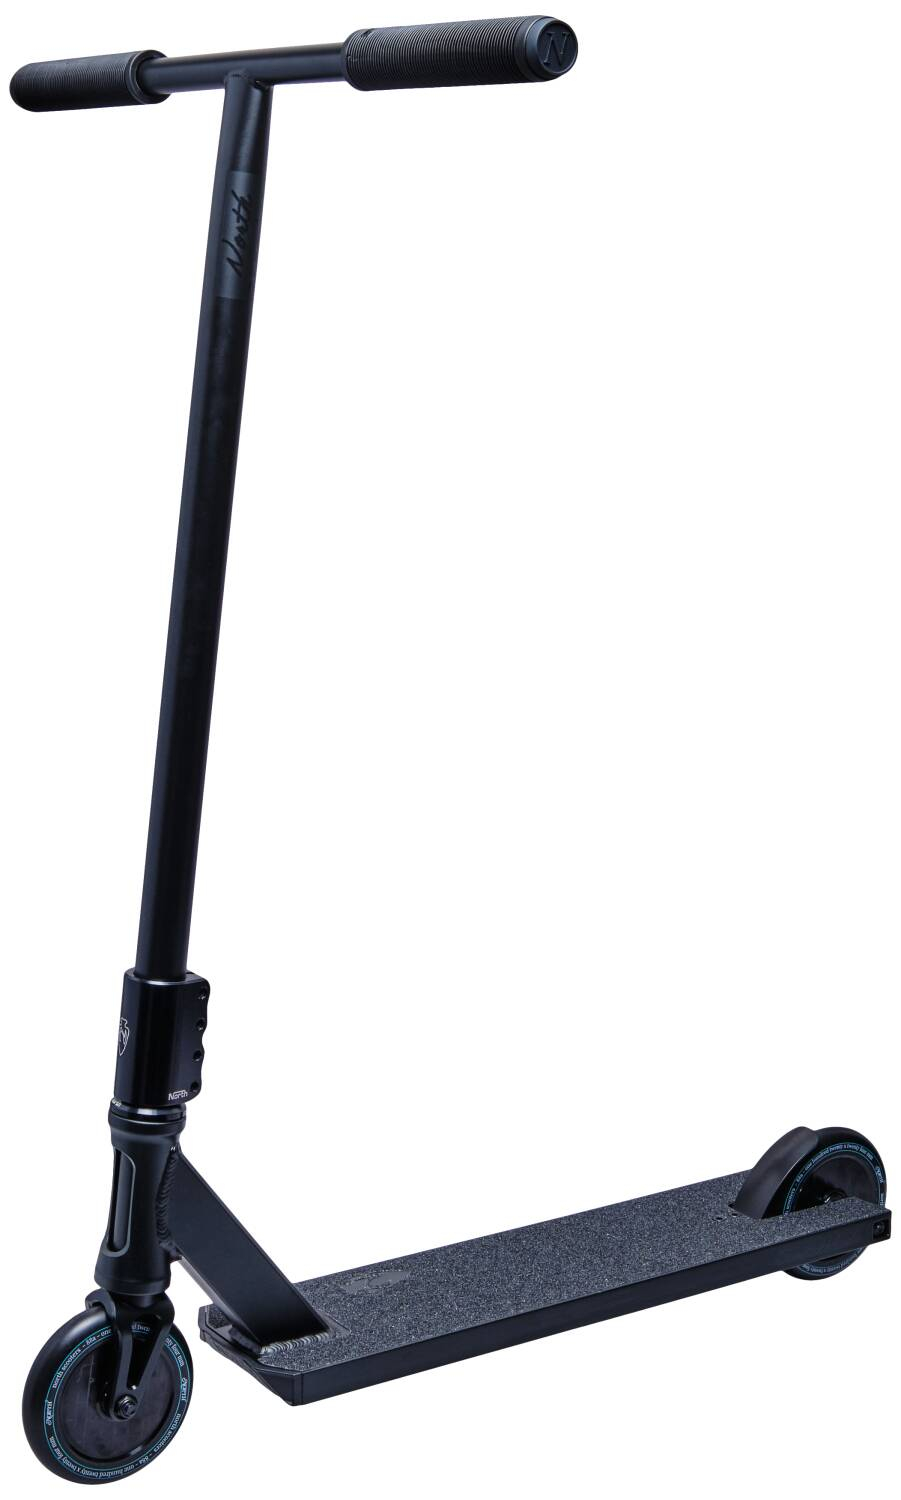 North Switchblade 2020 Pro Scooter